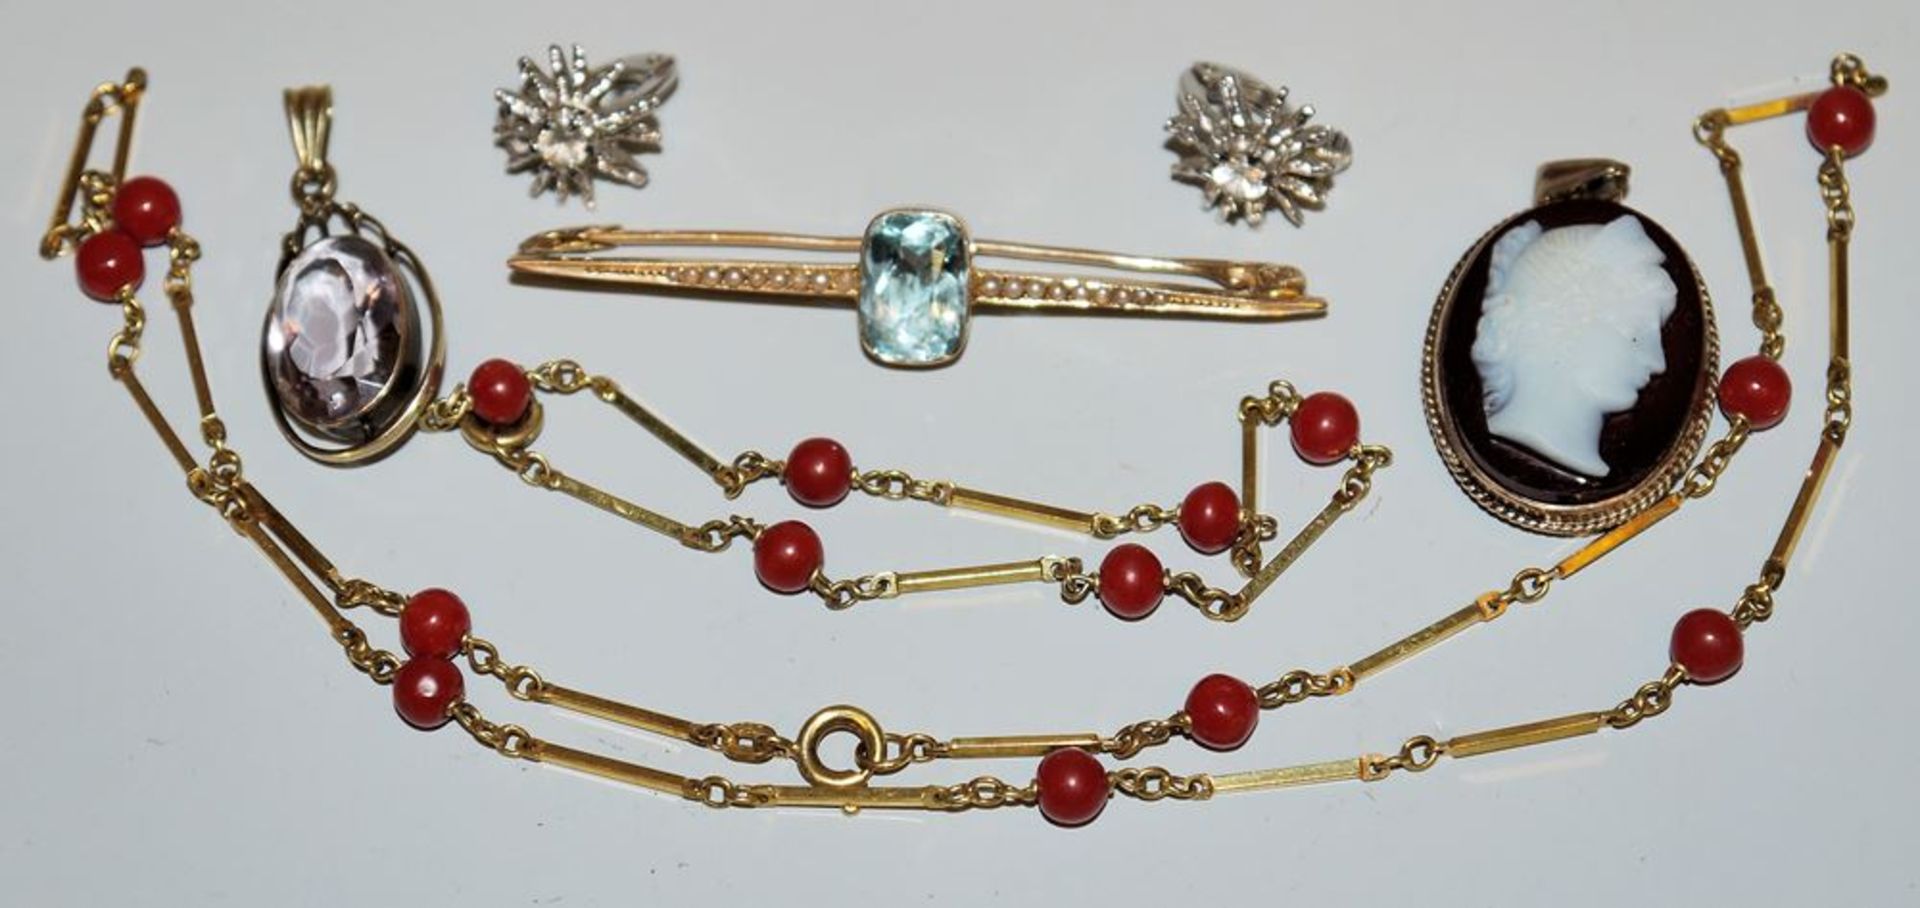 Collection of gold jewellery from the late 19th century